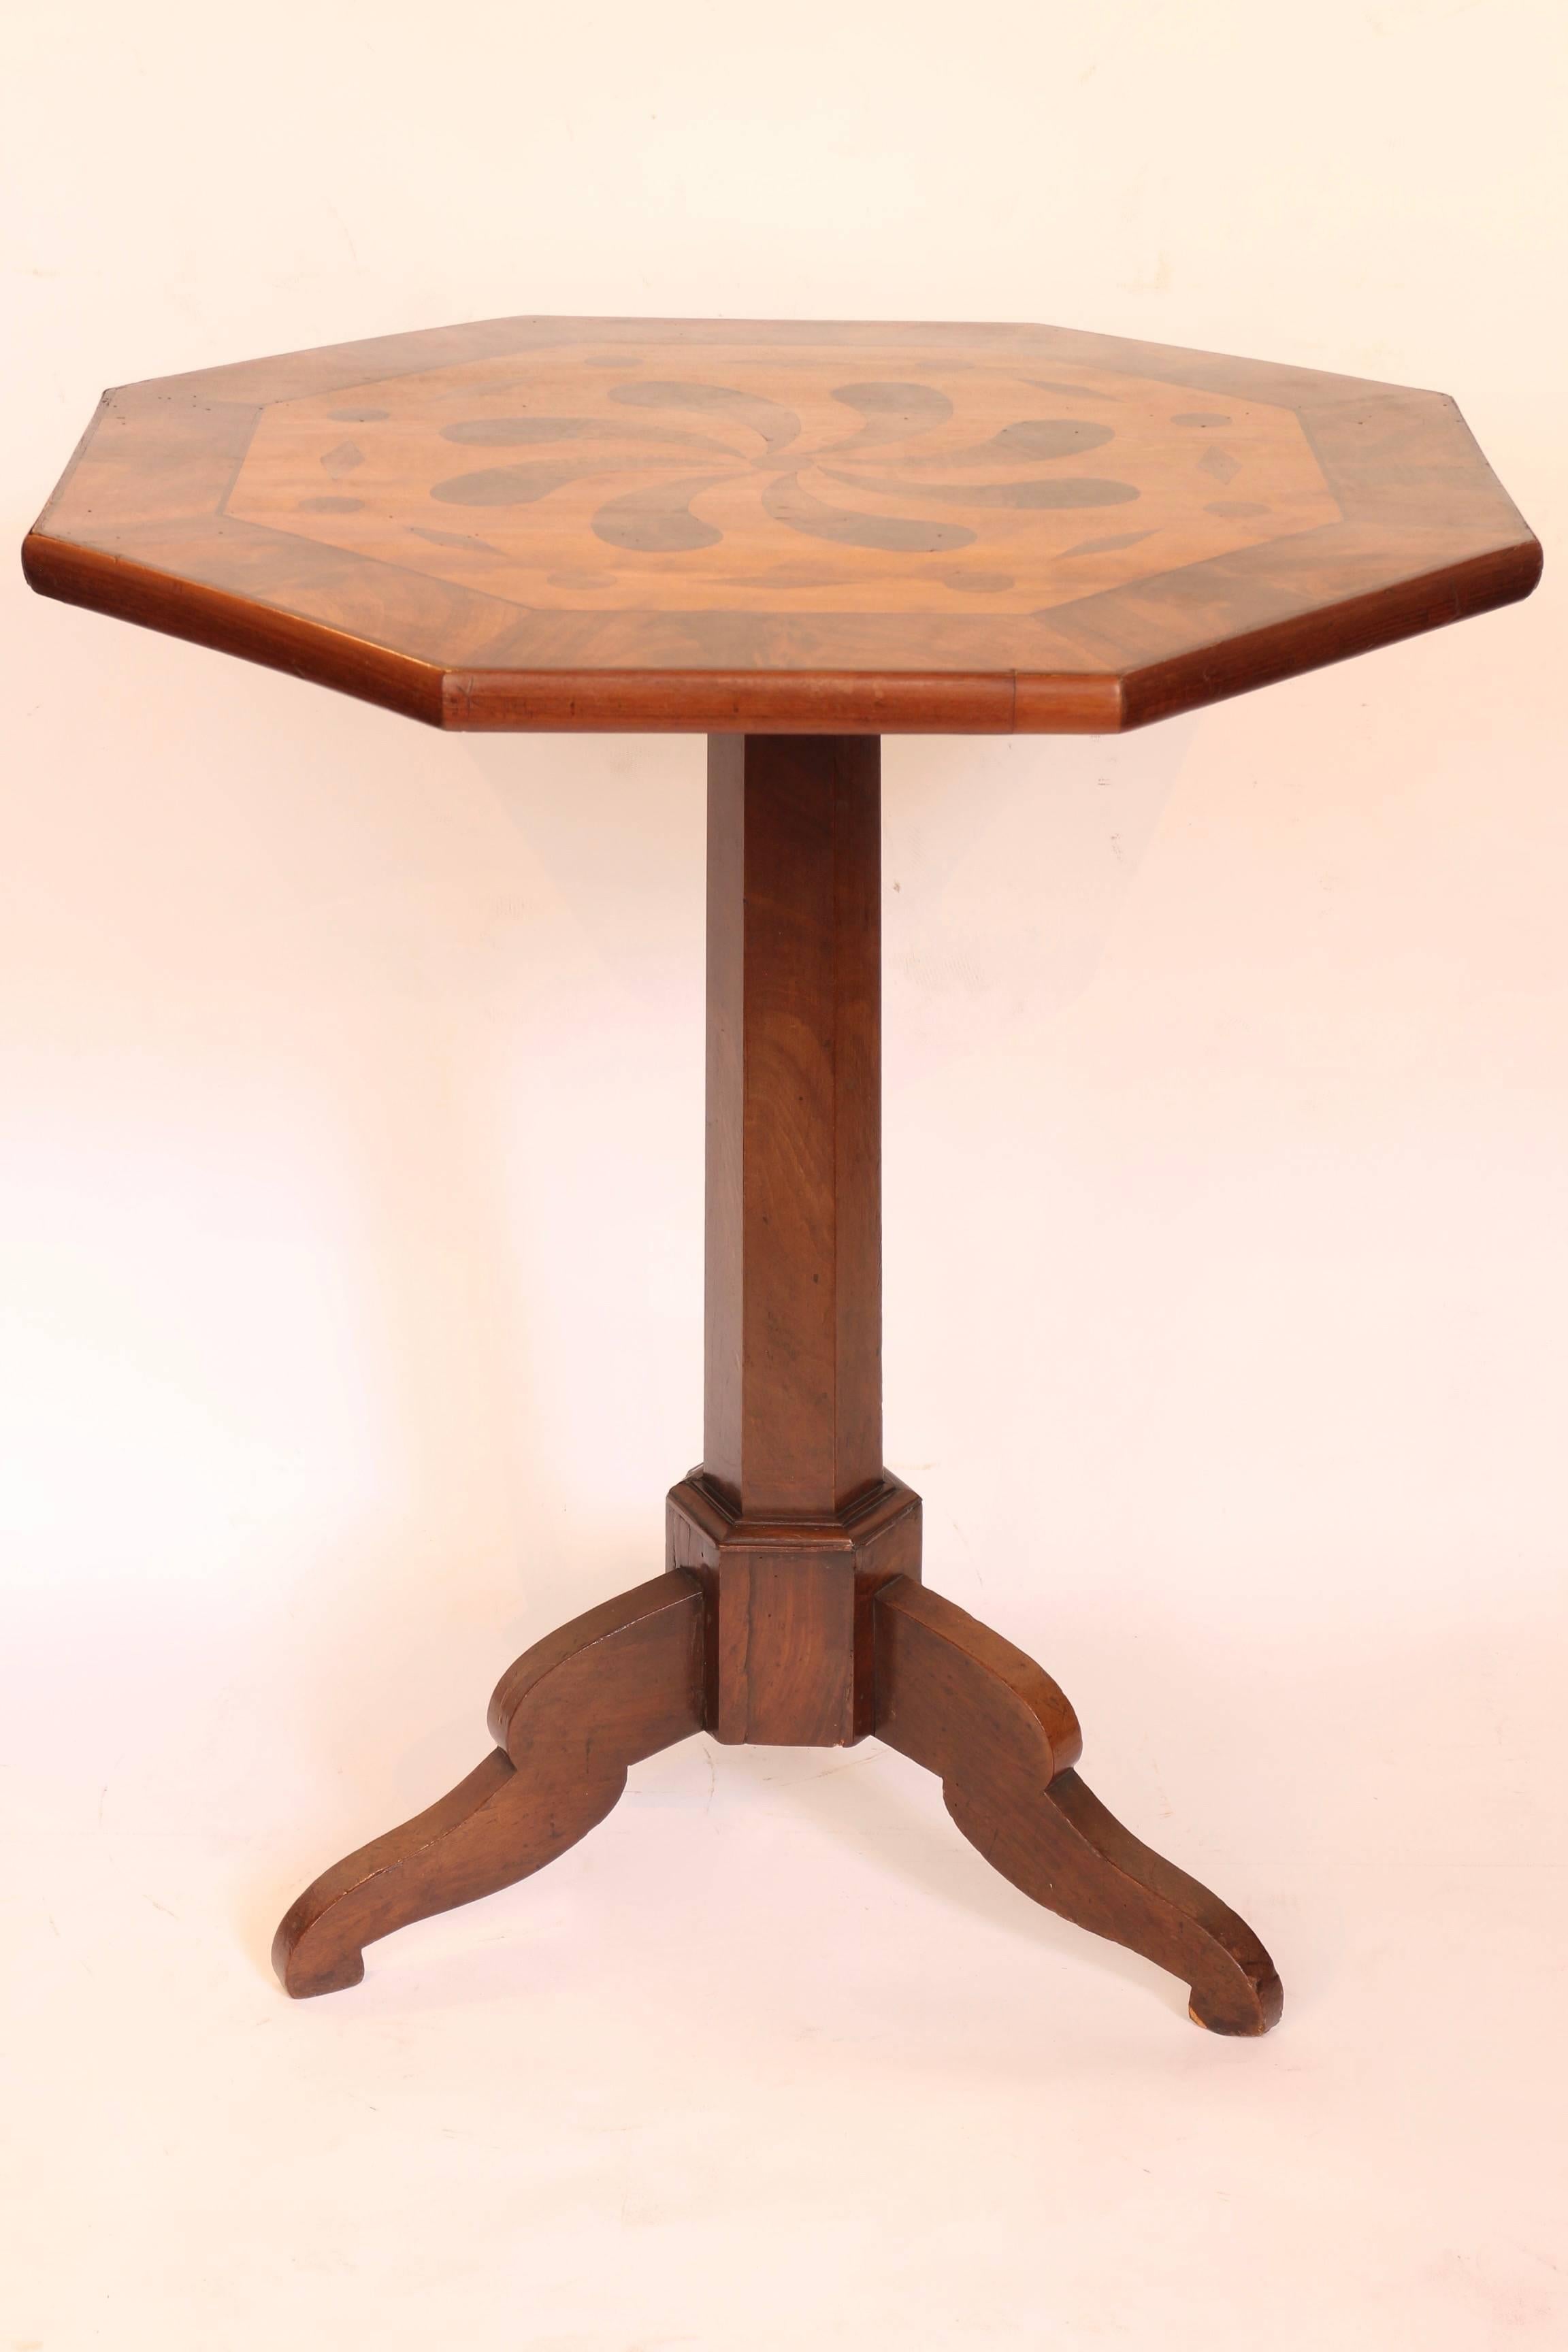 Mahogany tilt-top table with inlaid decoration on the top.
  